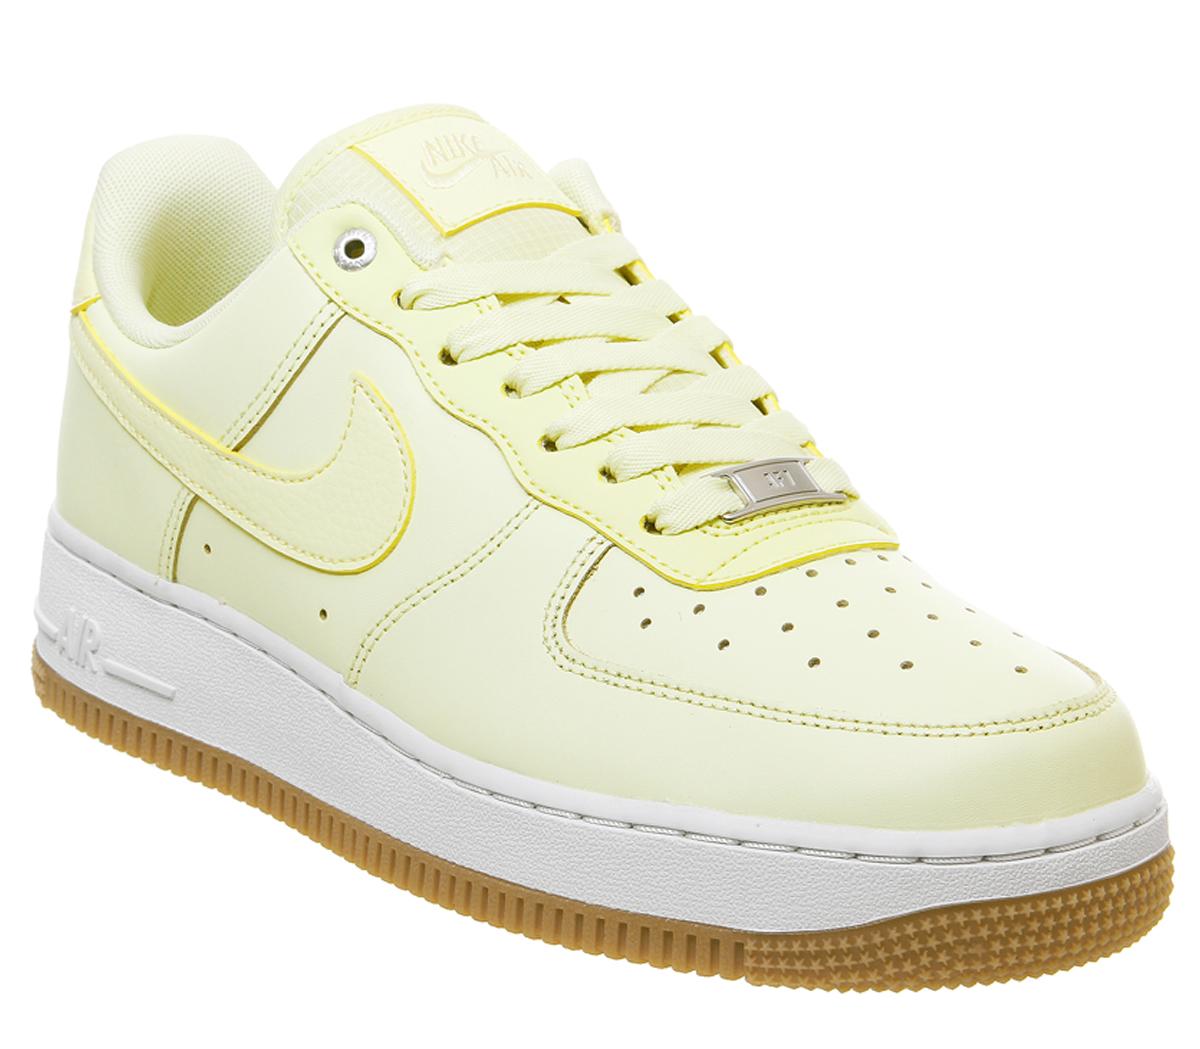 yellow green air force 1